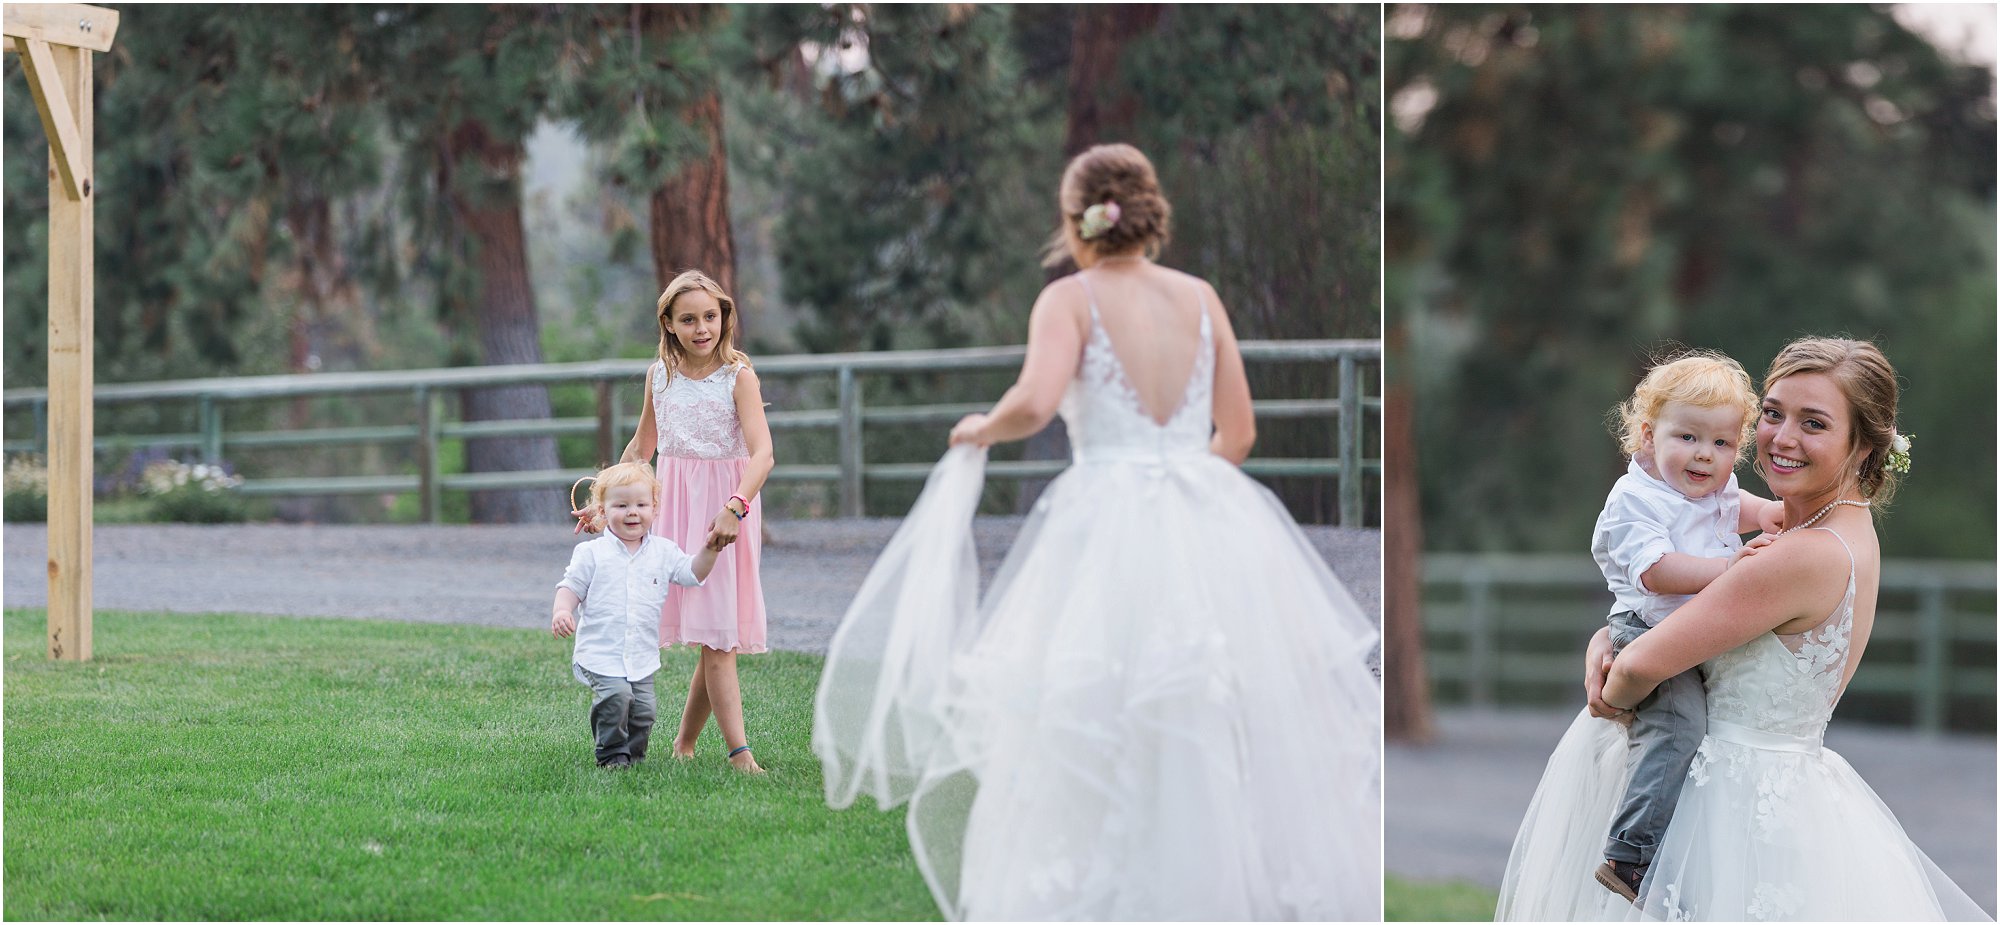 A little boy greets the bride with a big hug on her wedding day at Rock Springs Ranch in Bend, OR. | Erica Swantek Photography